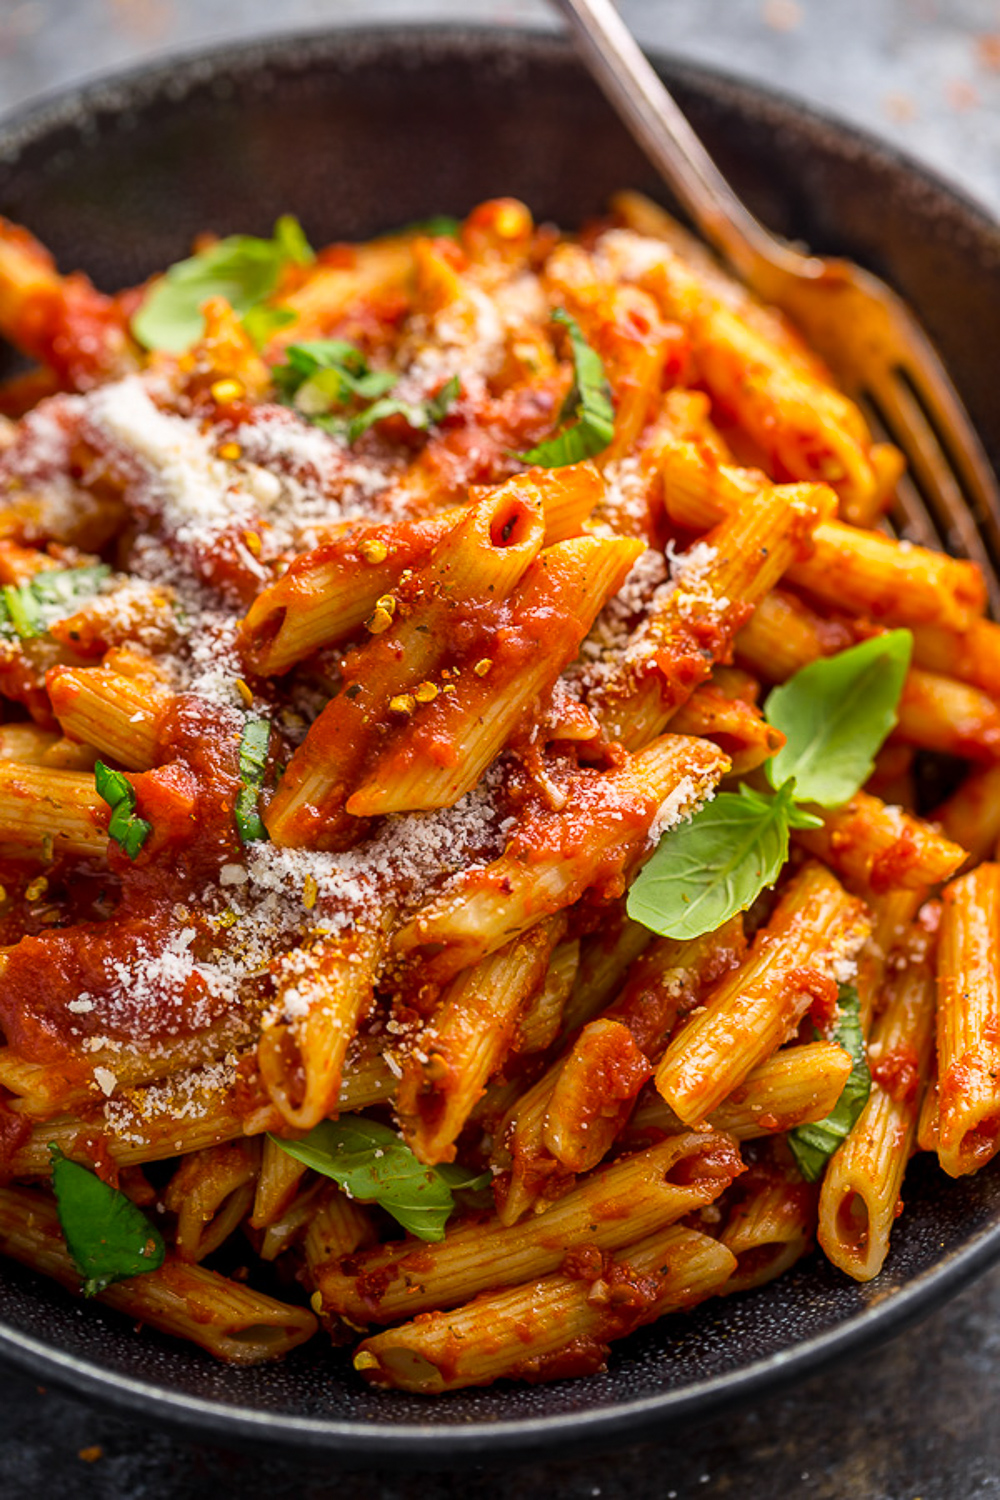 Today is National Pasta Day! And as an avid pasta lover, I felt it my responsibility to share 18 cozy pasta recipes with you! They're perfect for celebrating this delicious "holiday"... and will totally take care of the age old question: "what are we having for dinner tonight?". Buon appetito!